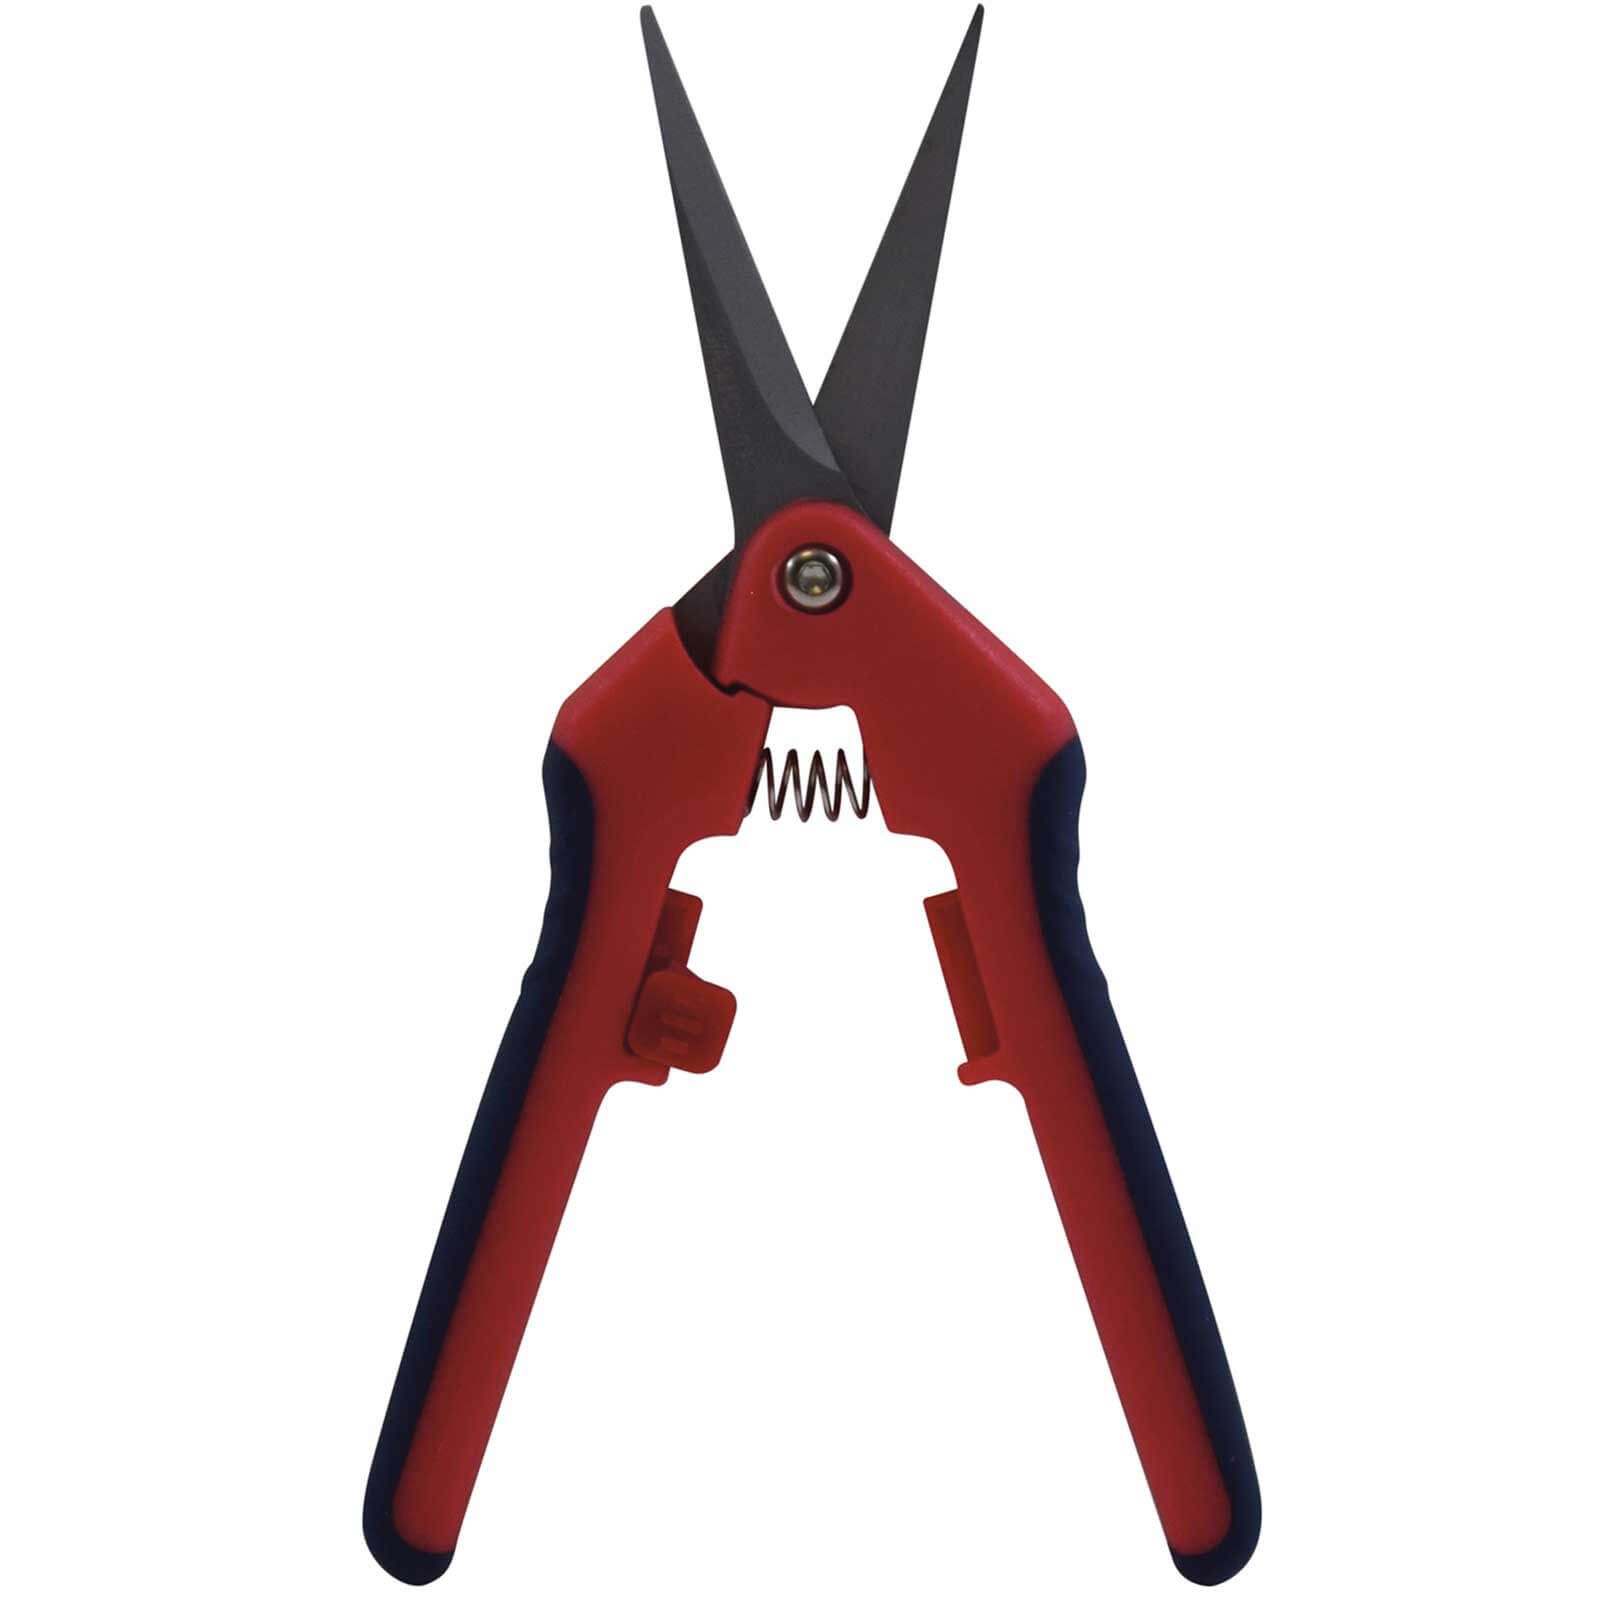 Spear and Jackson Precision Garden Snips 170mm